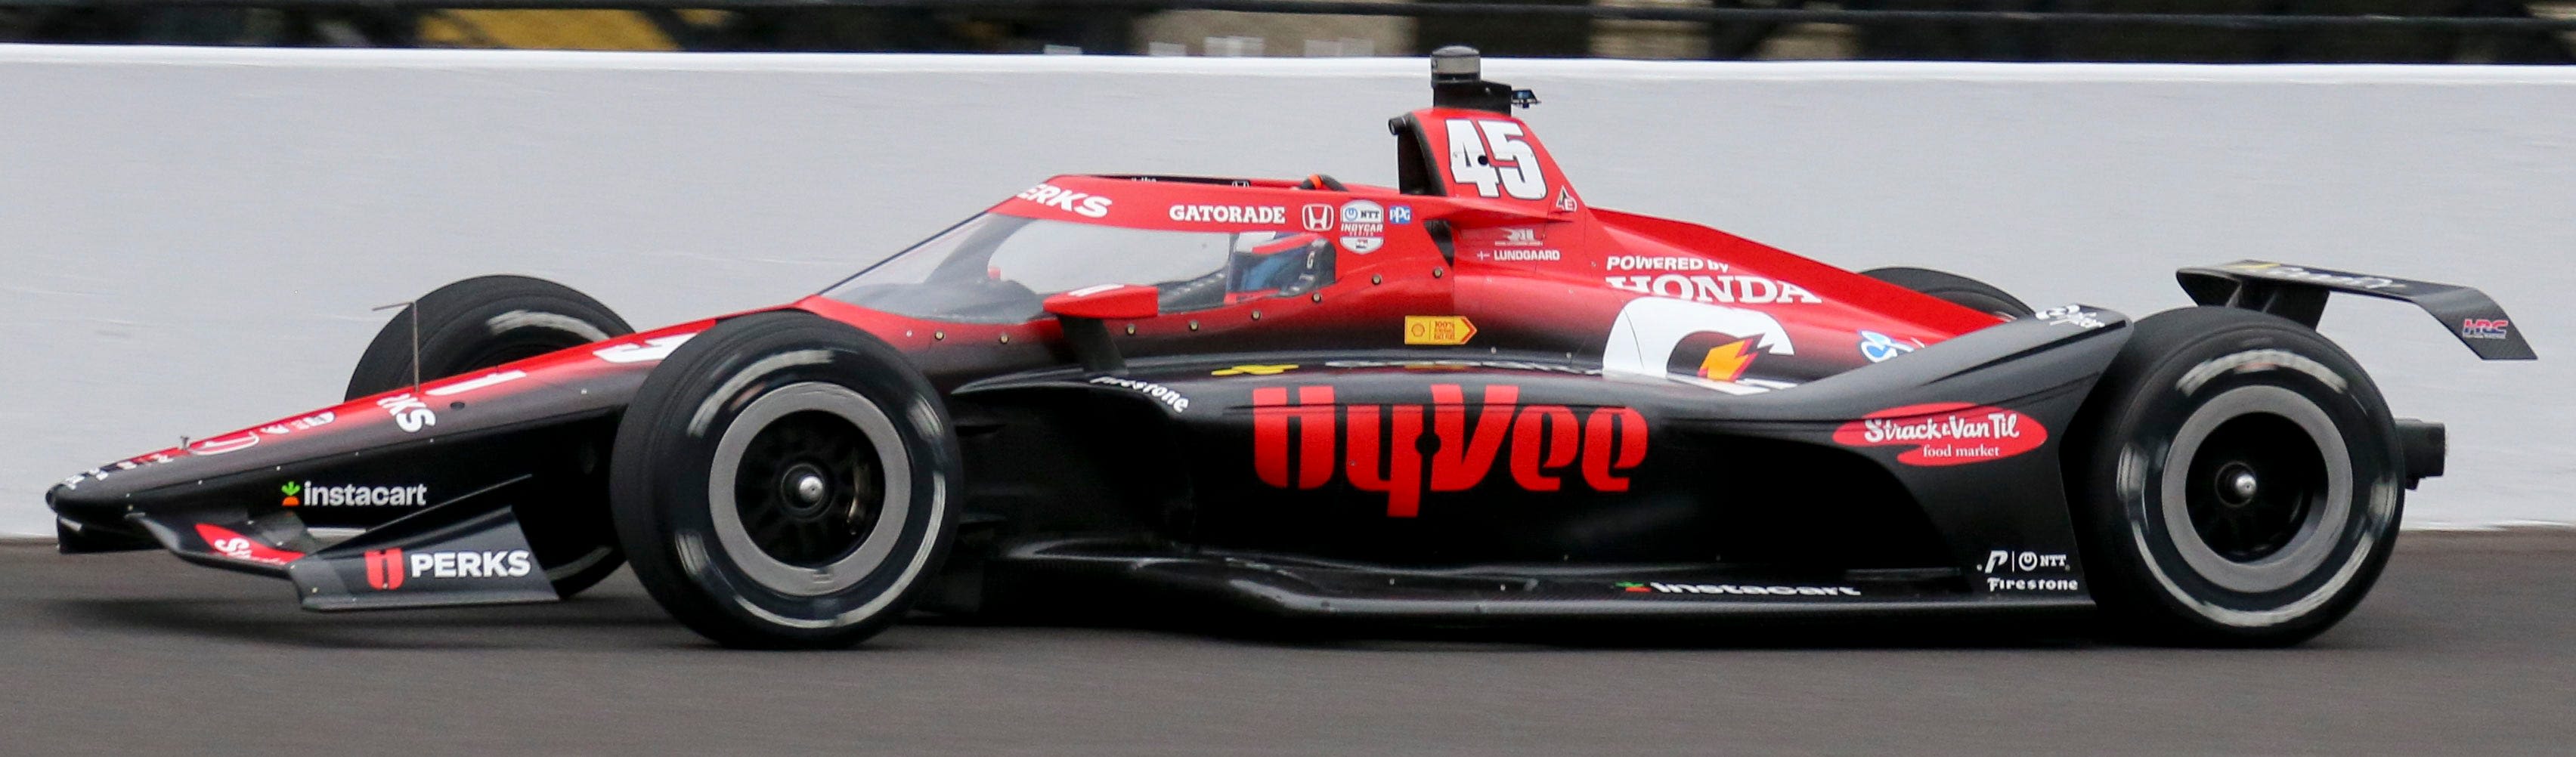 Hy-Vee seeks to fuel its growth with IndyCar partnership during Indianapolis 500